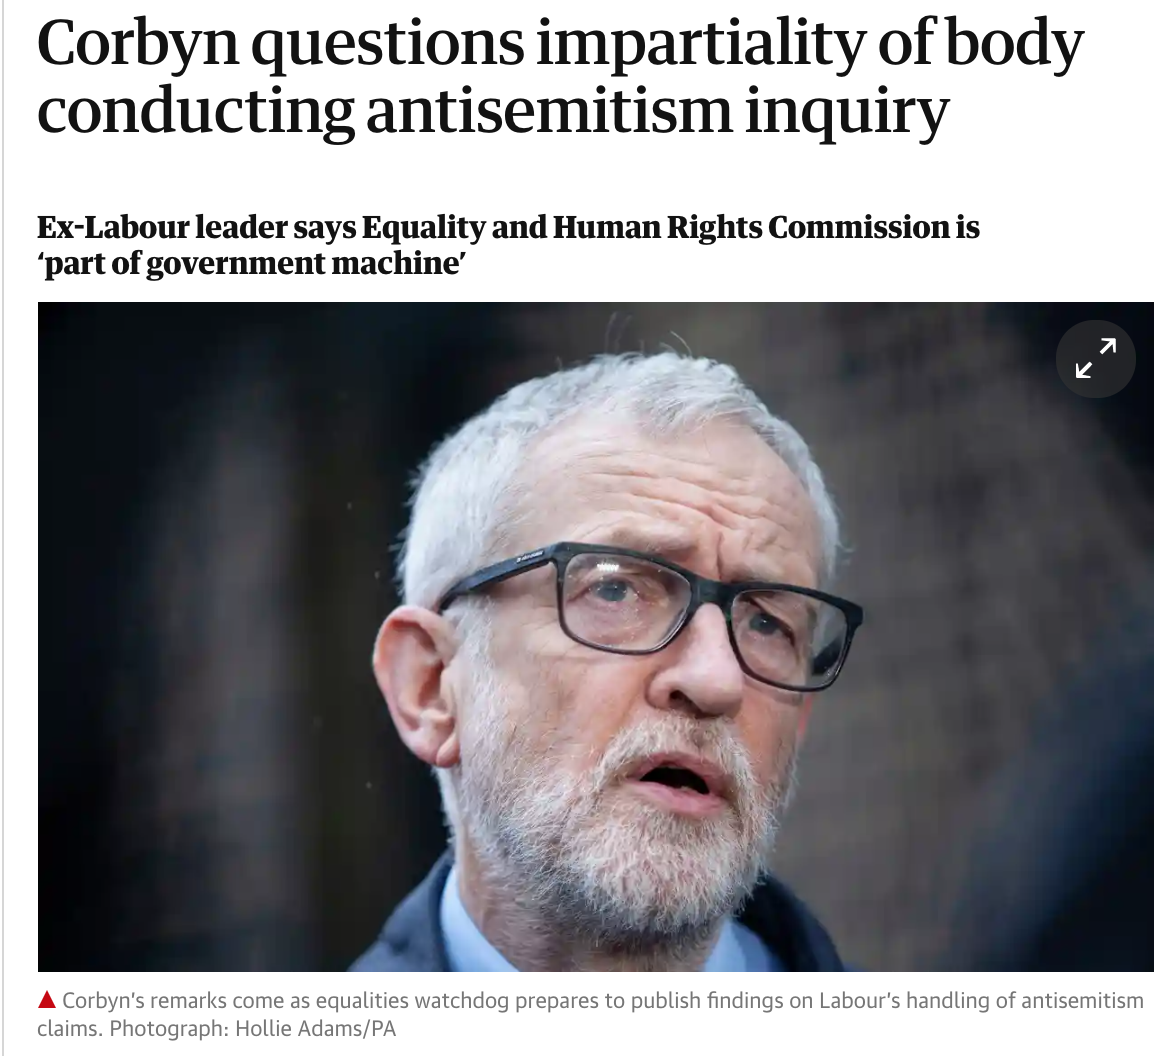 In 2016 and 2017  @guardian published numerous reports with criticisms of the EHRC. Criticisms weren't mentioned again until June this year, this time from Corbyn. The paper made no reference to the previous concerns raised in their paper to contextualise Corbyn's interview.